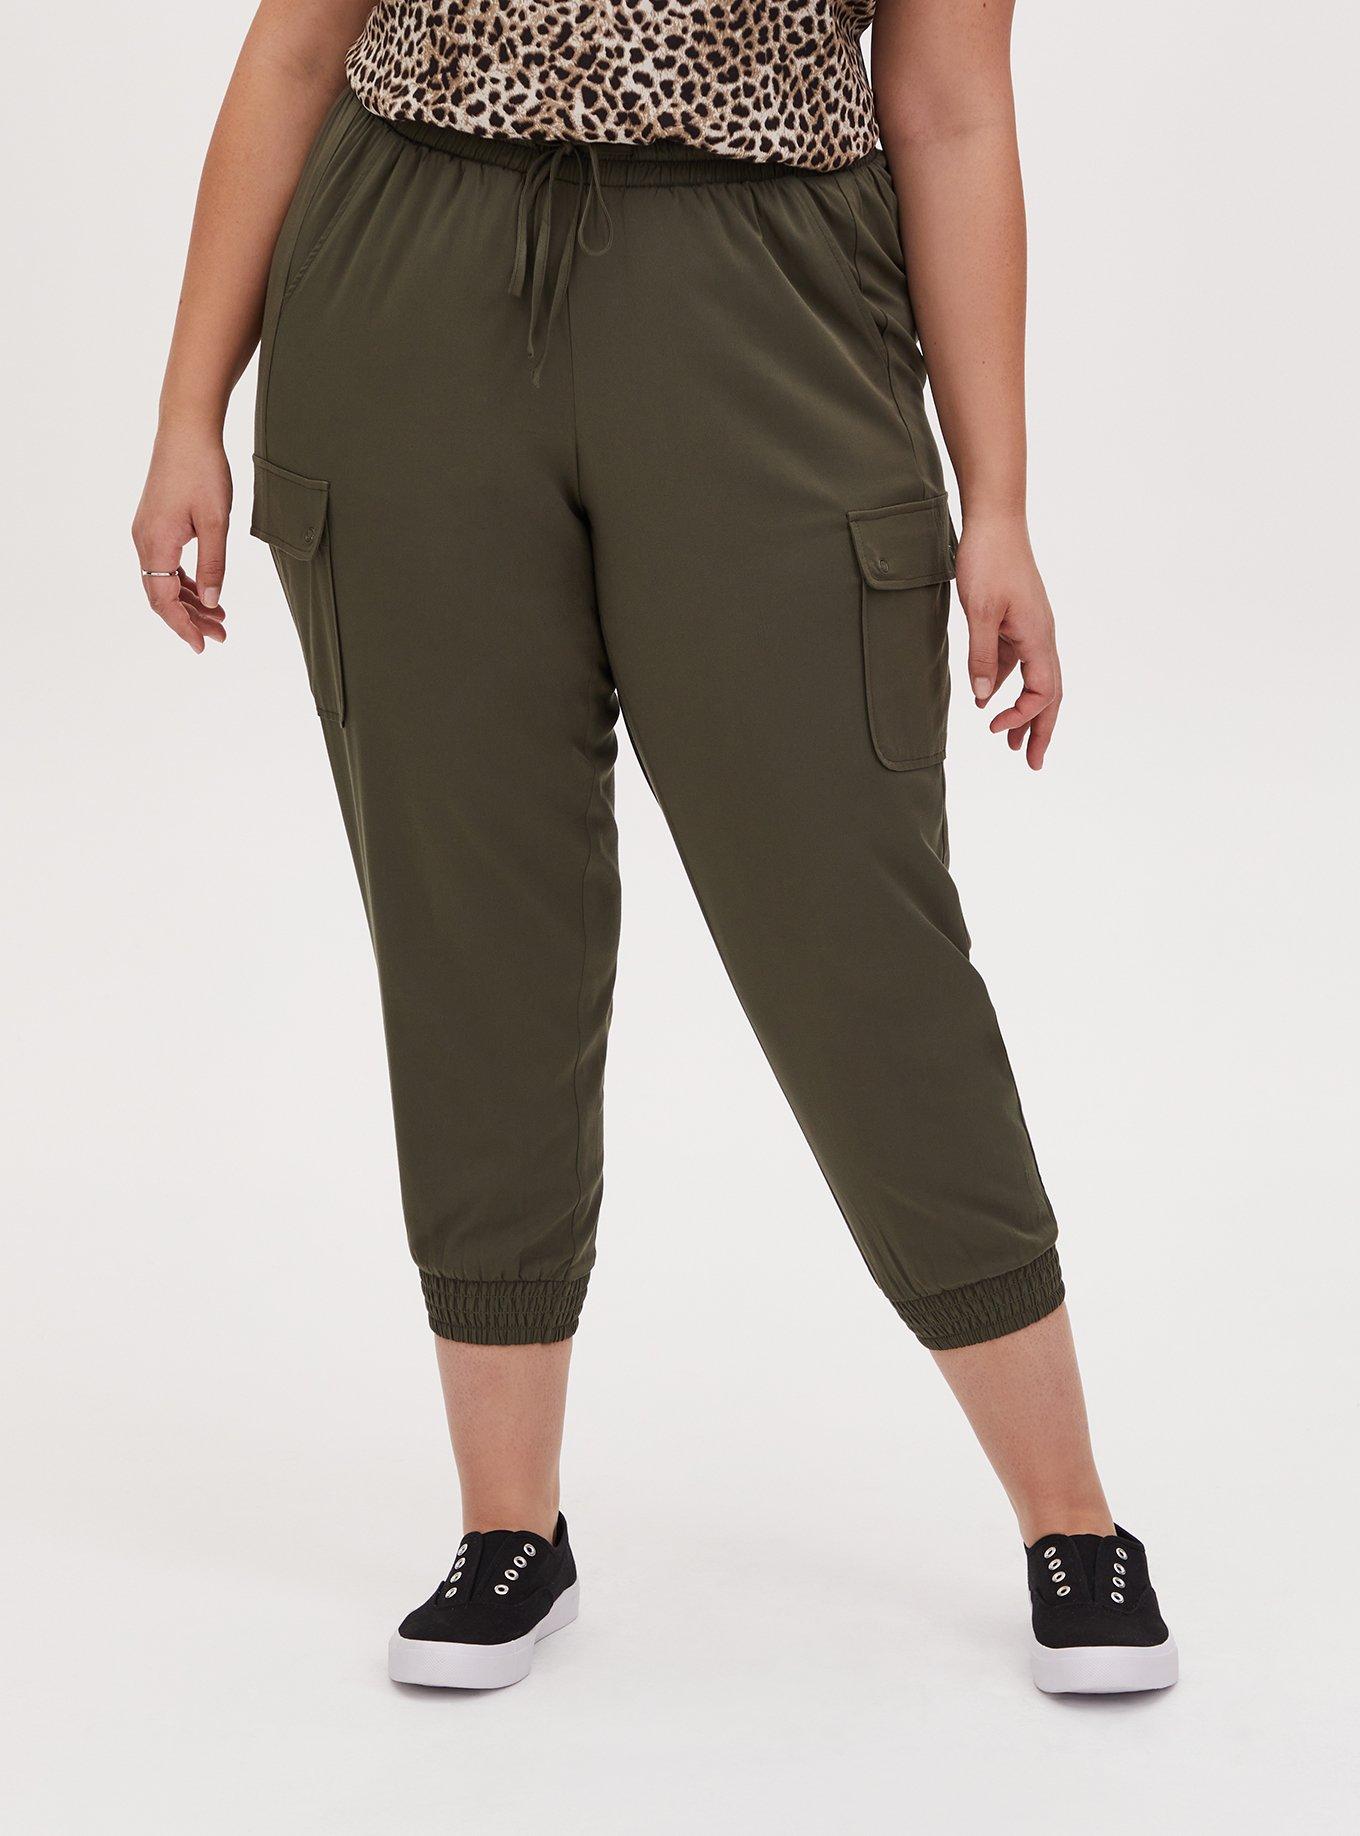 Plus Size - Relaxed Fit Jogger - Challis Olive Green - Torrid